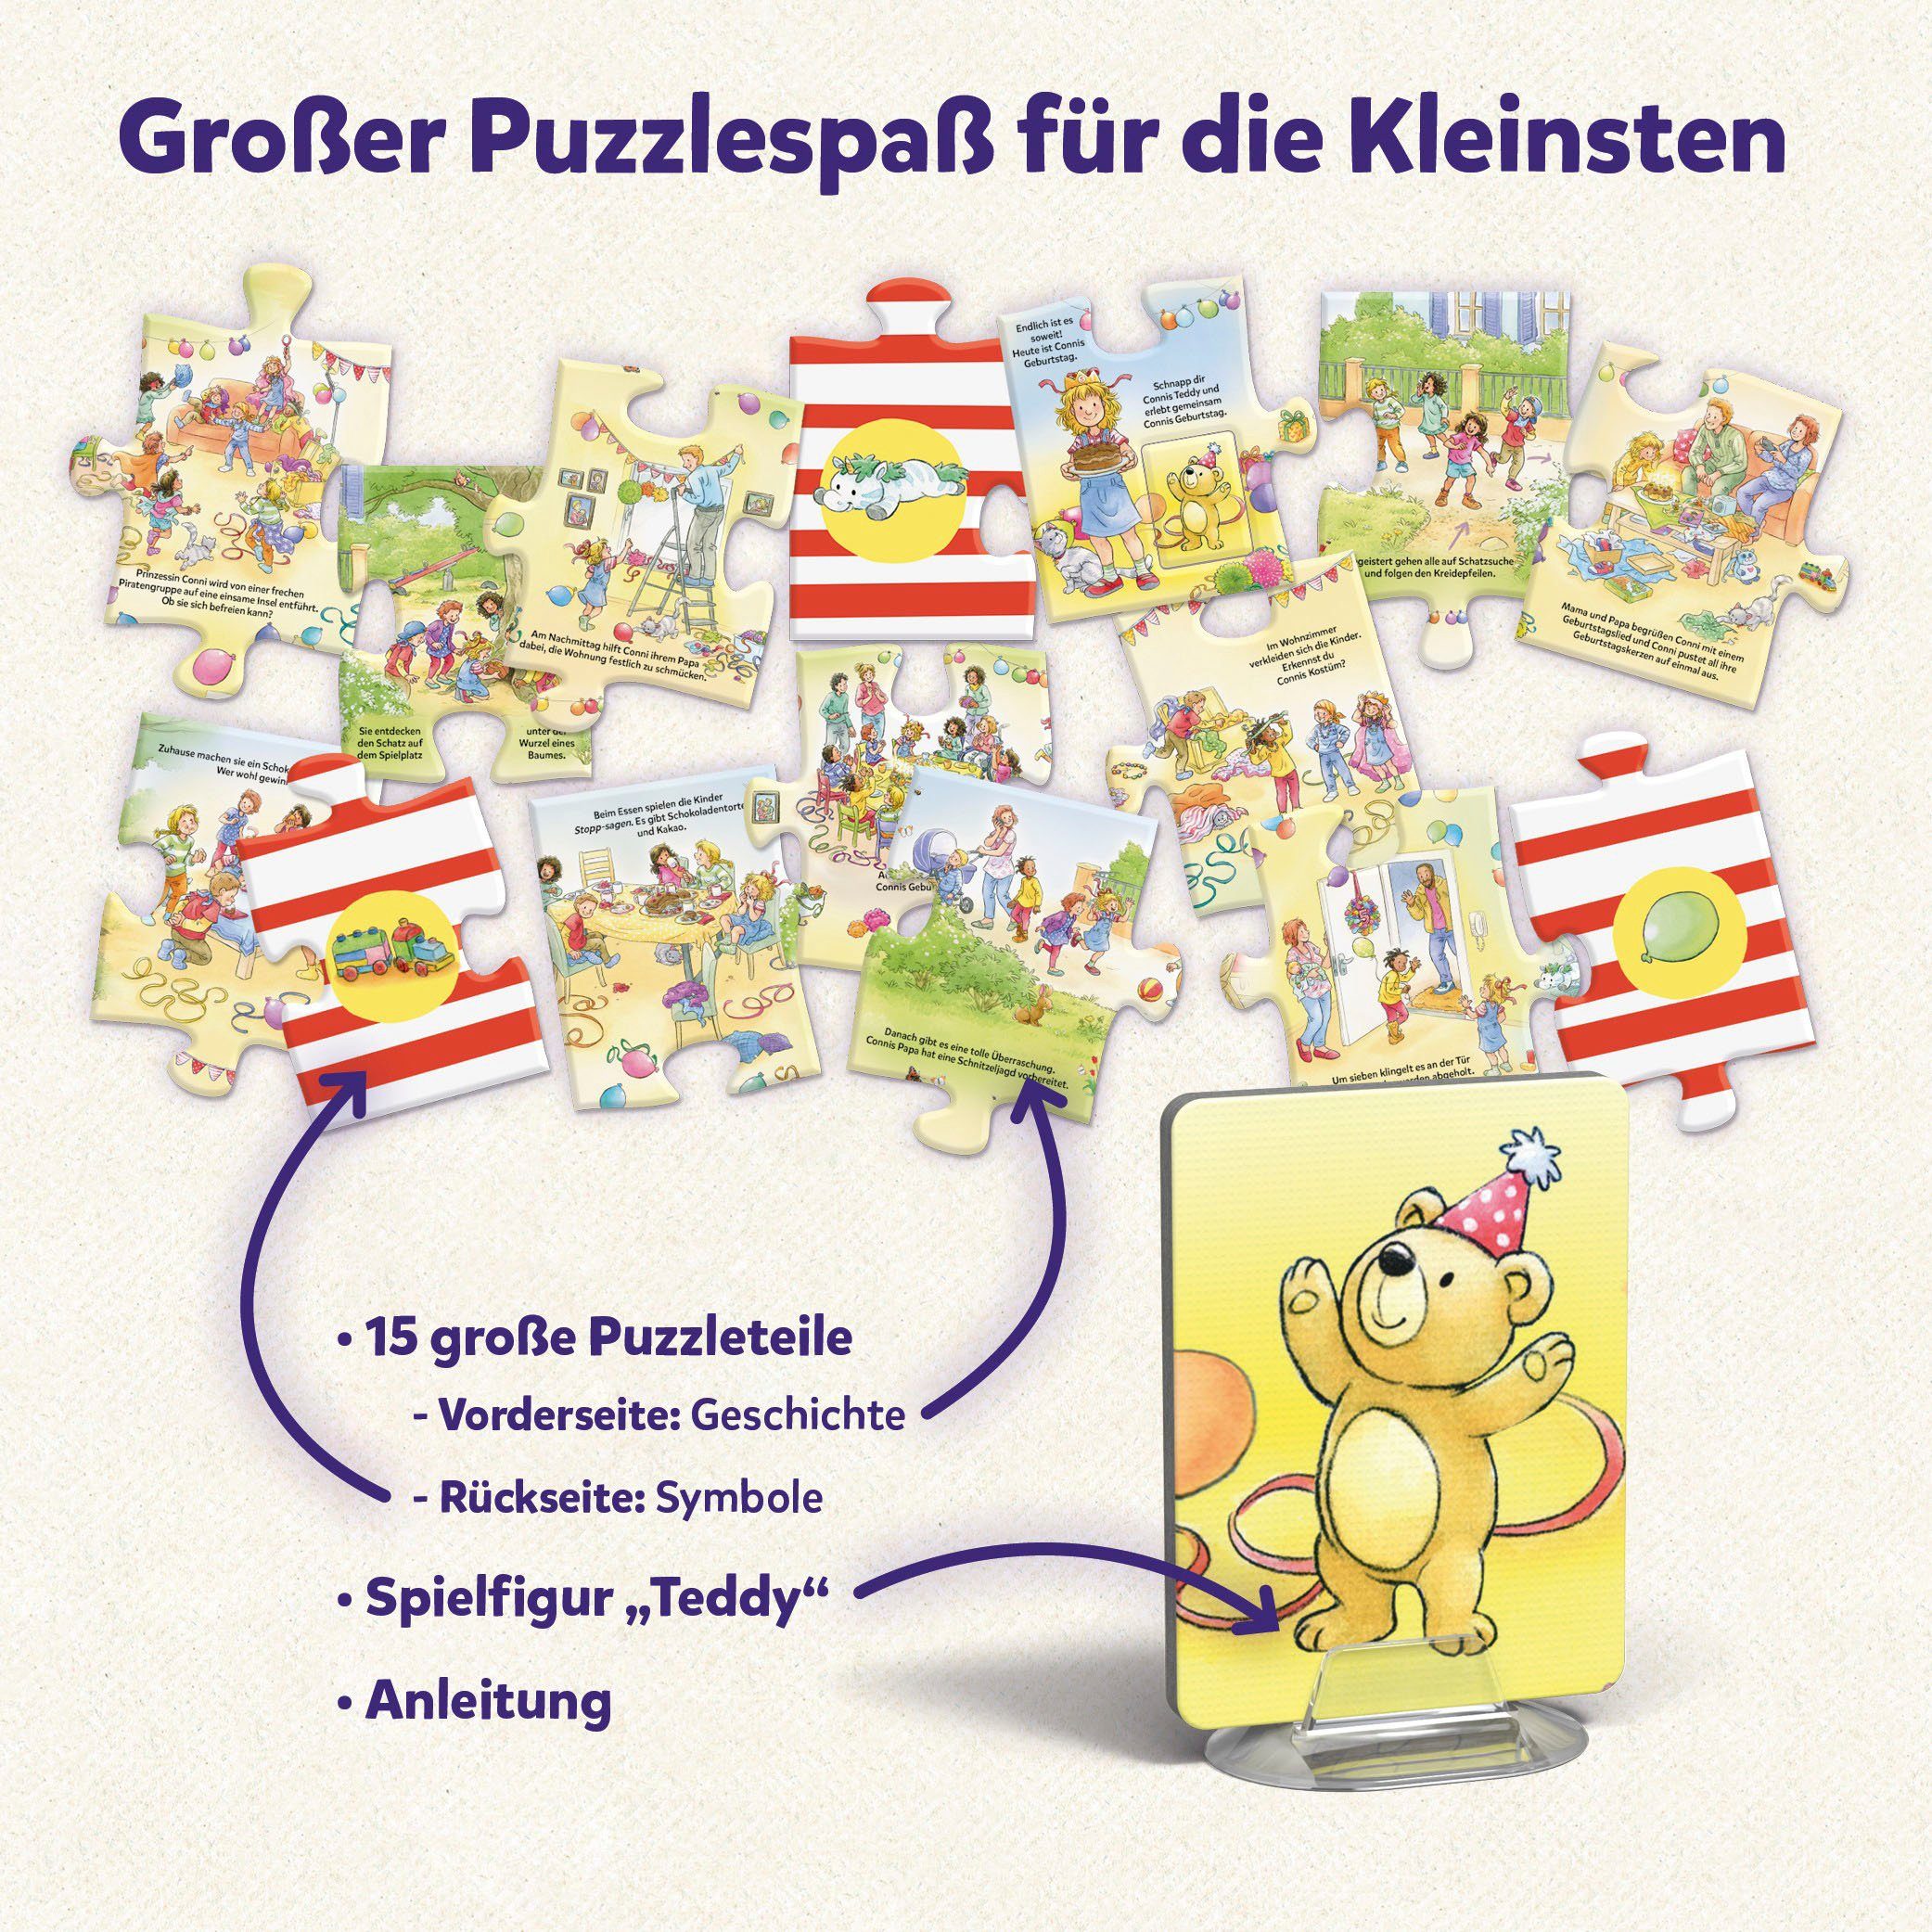 Kosmos Puzzle Mein in 15 Geburtstag, - Germany erstes Story-Puzzle Puzzleteile, Conni hat Made